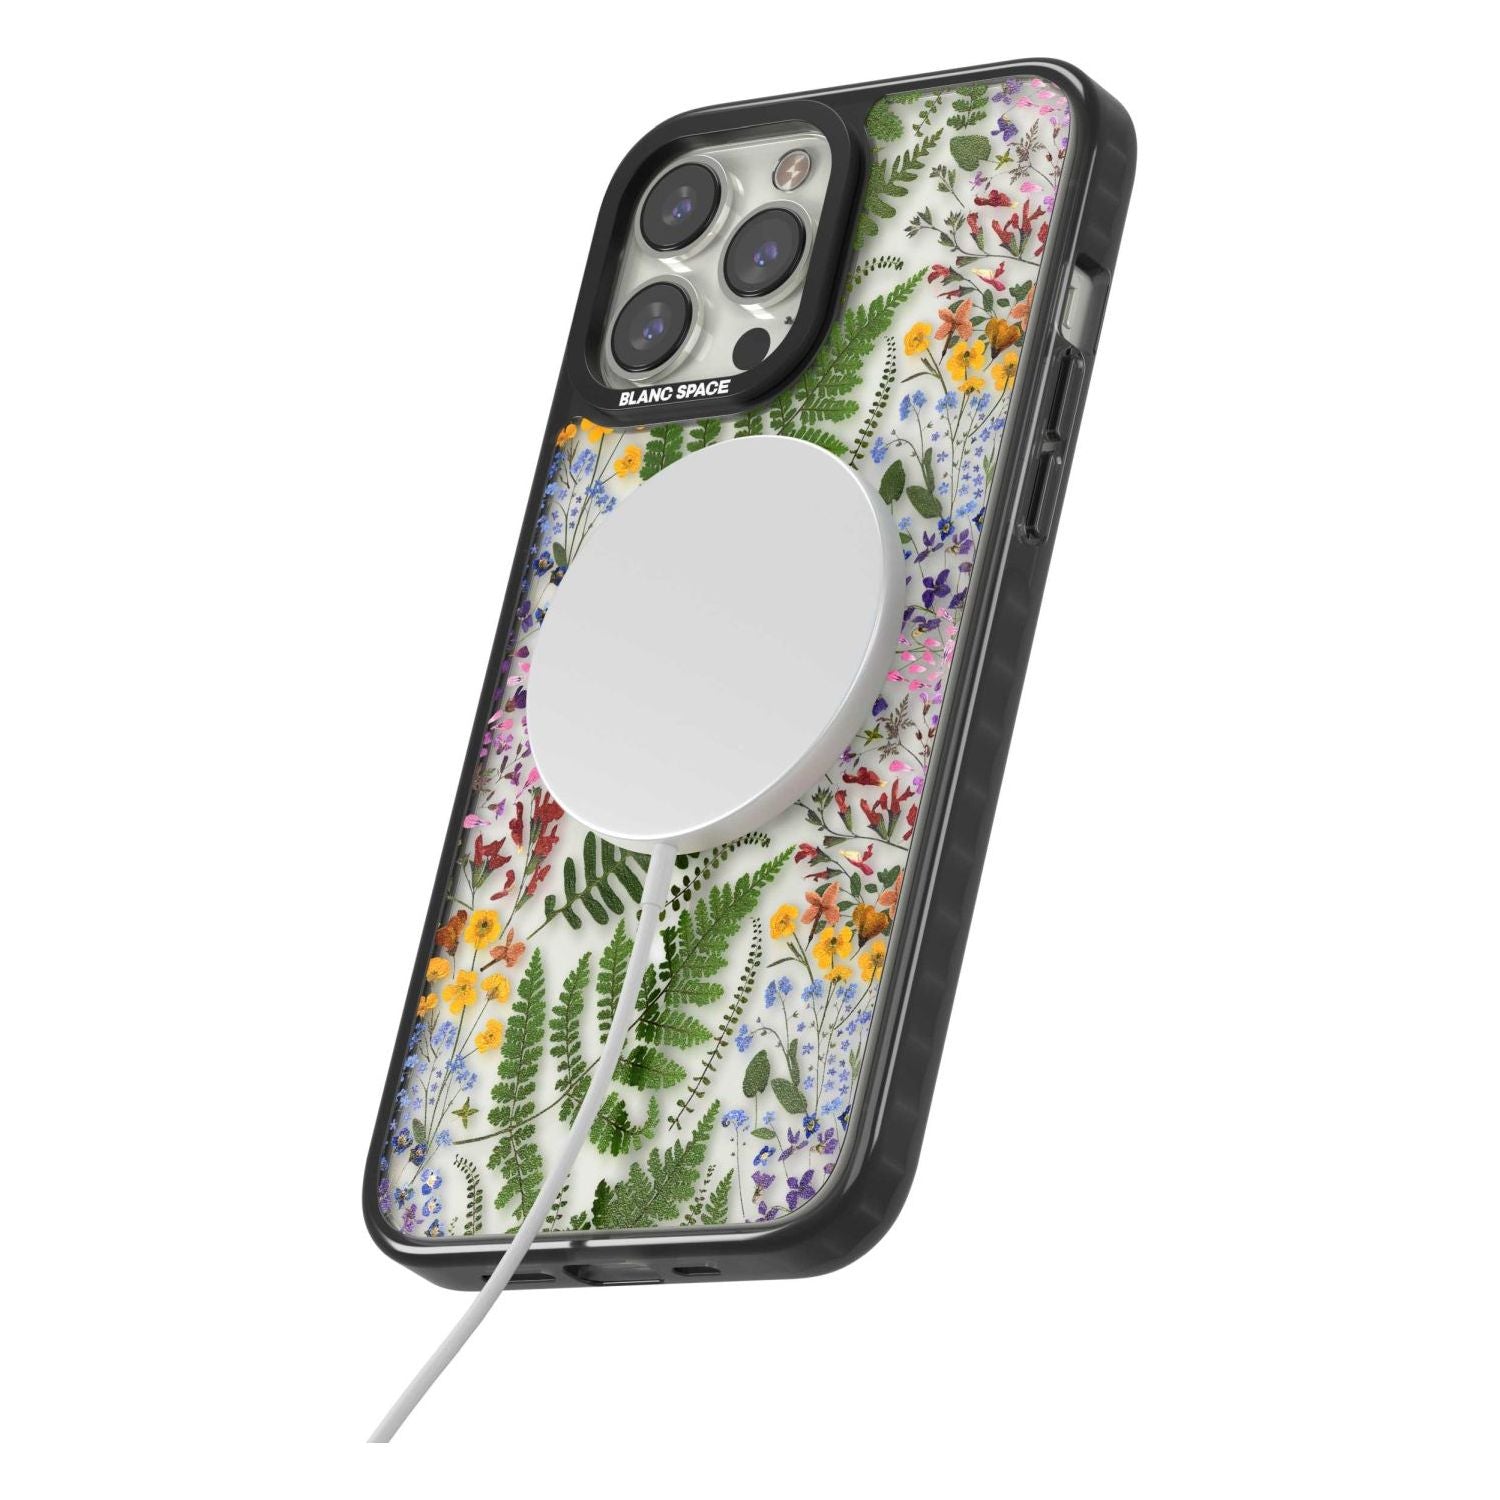 Busy Floral and Fern Design Phone Case iPhone 15 Pro Max / Black Impact Case,iPhone 15 Plus / Black Impact Case,iPhone 15 Pro / Black Impact Case,iPhone 15 / Black Impact Case,iPhone 15 Pro Max / Impact Case,iPhone 15 Plus / Impact Case,iPhone 15 Pro / Impact Case,iPhone 15 / Impact Case,iPhone 15 Pro Max / Magsafe Black Impact Case,iPhone 15 Plus / Magsafe Black Impact Case,iPhone 15 Pro / Magsafe Black Impact Case,iPhone 15 / Magsafe Black Impact Case,iPhone 14 Pro Max / Black Impact Case,iPhone 14 Plus /